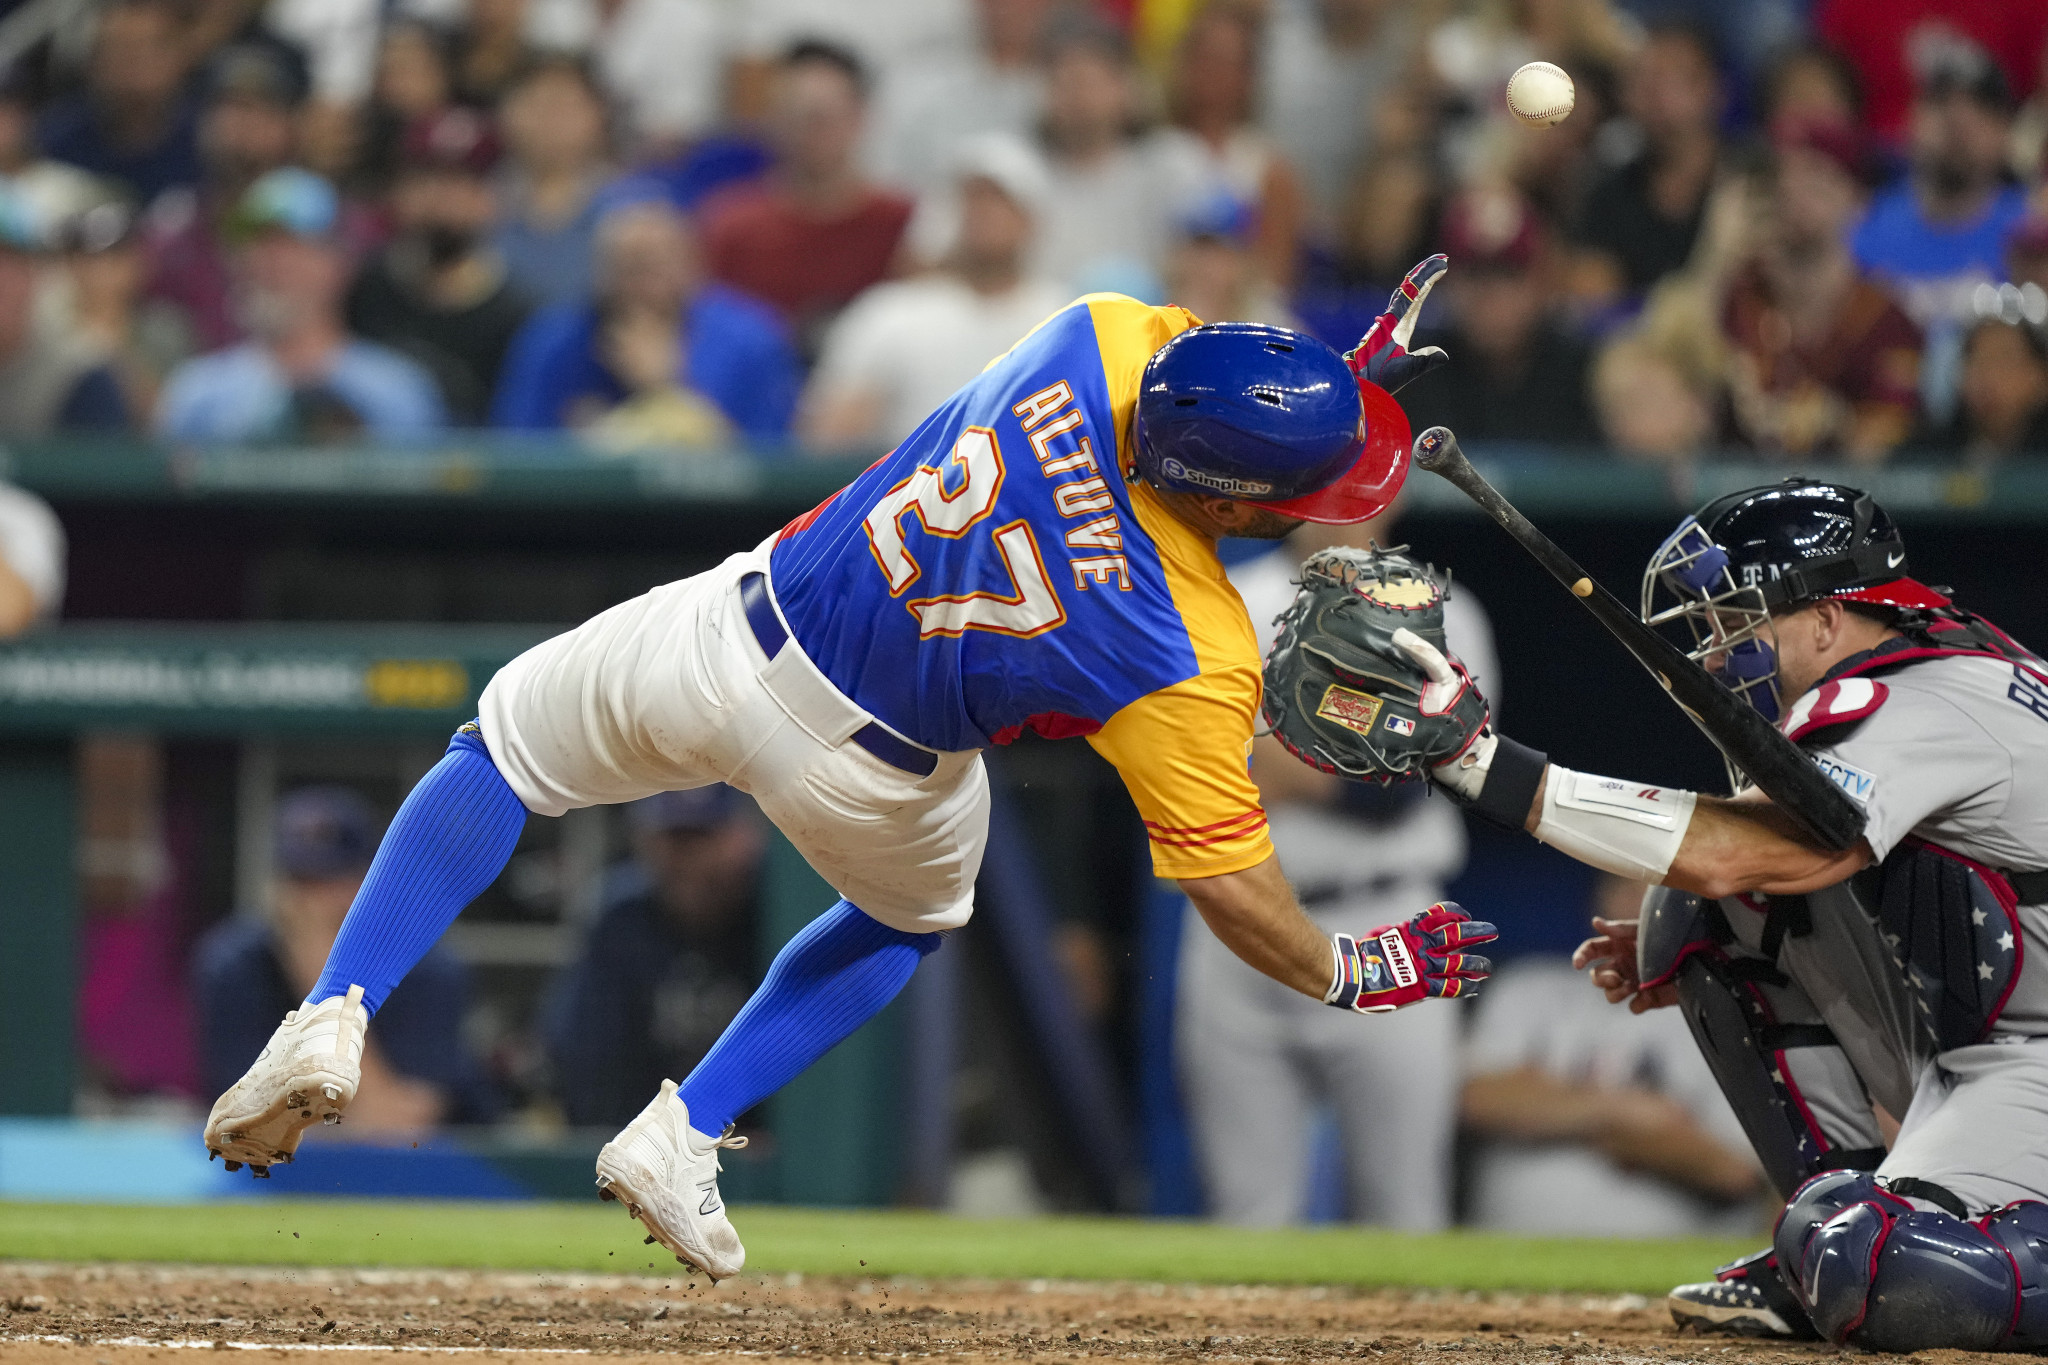 Venezuela's Jose Altuve was forced out of the match in the fifth inning after being hit on the hand by US pitcher Daniel Bard ©Getty Images